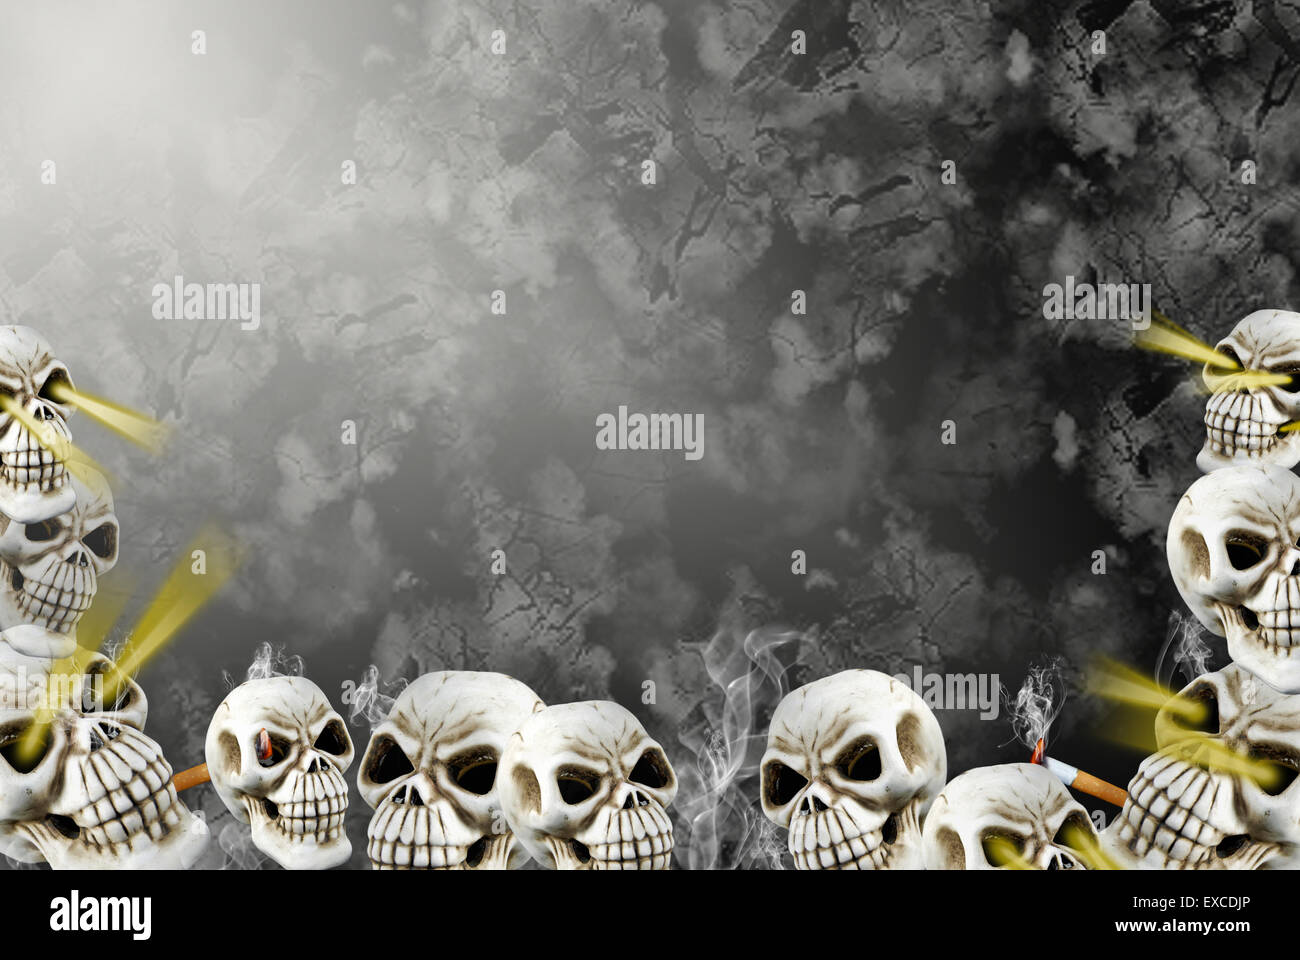 Layers of human skulls with lit cigarettes on textured background. Stock Photo